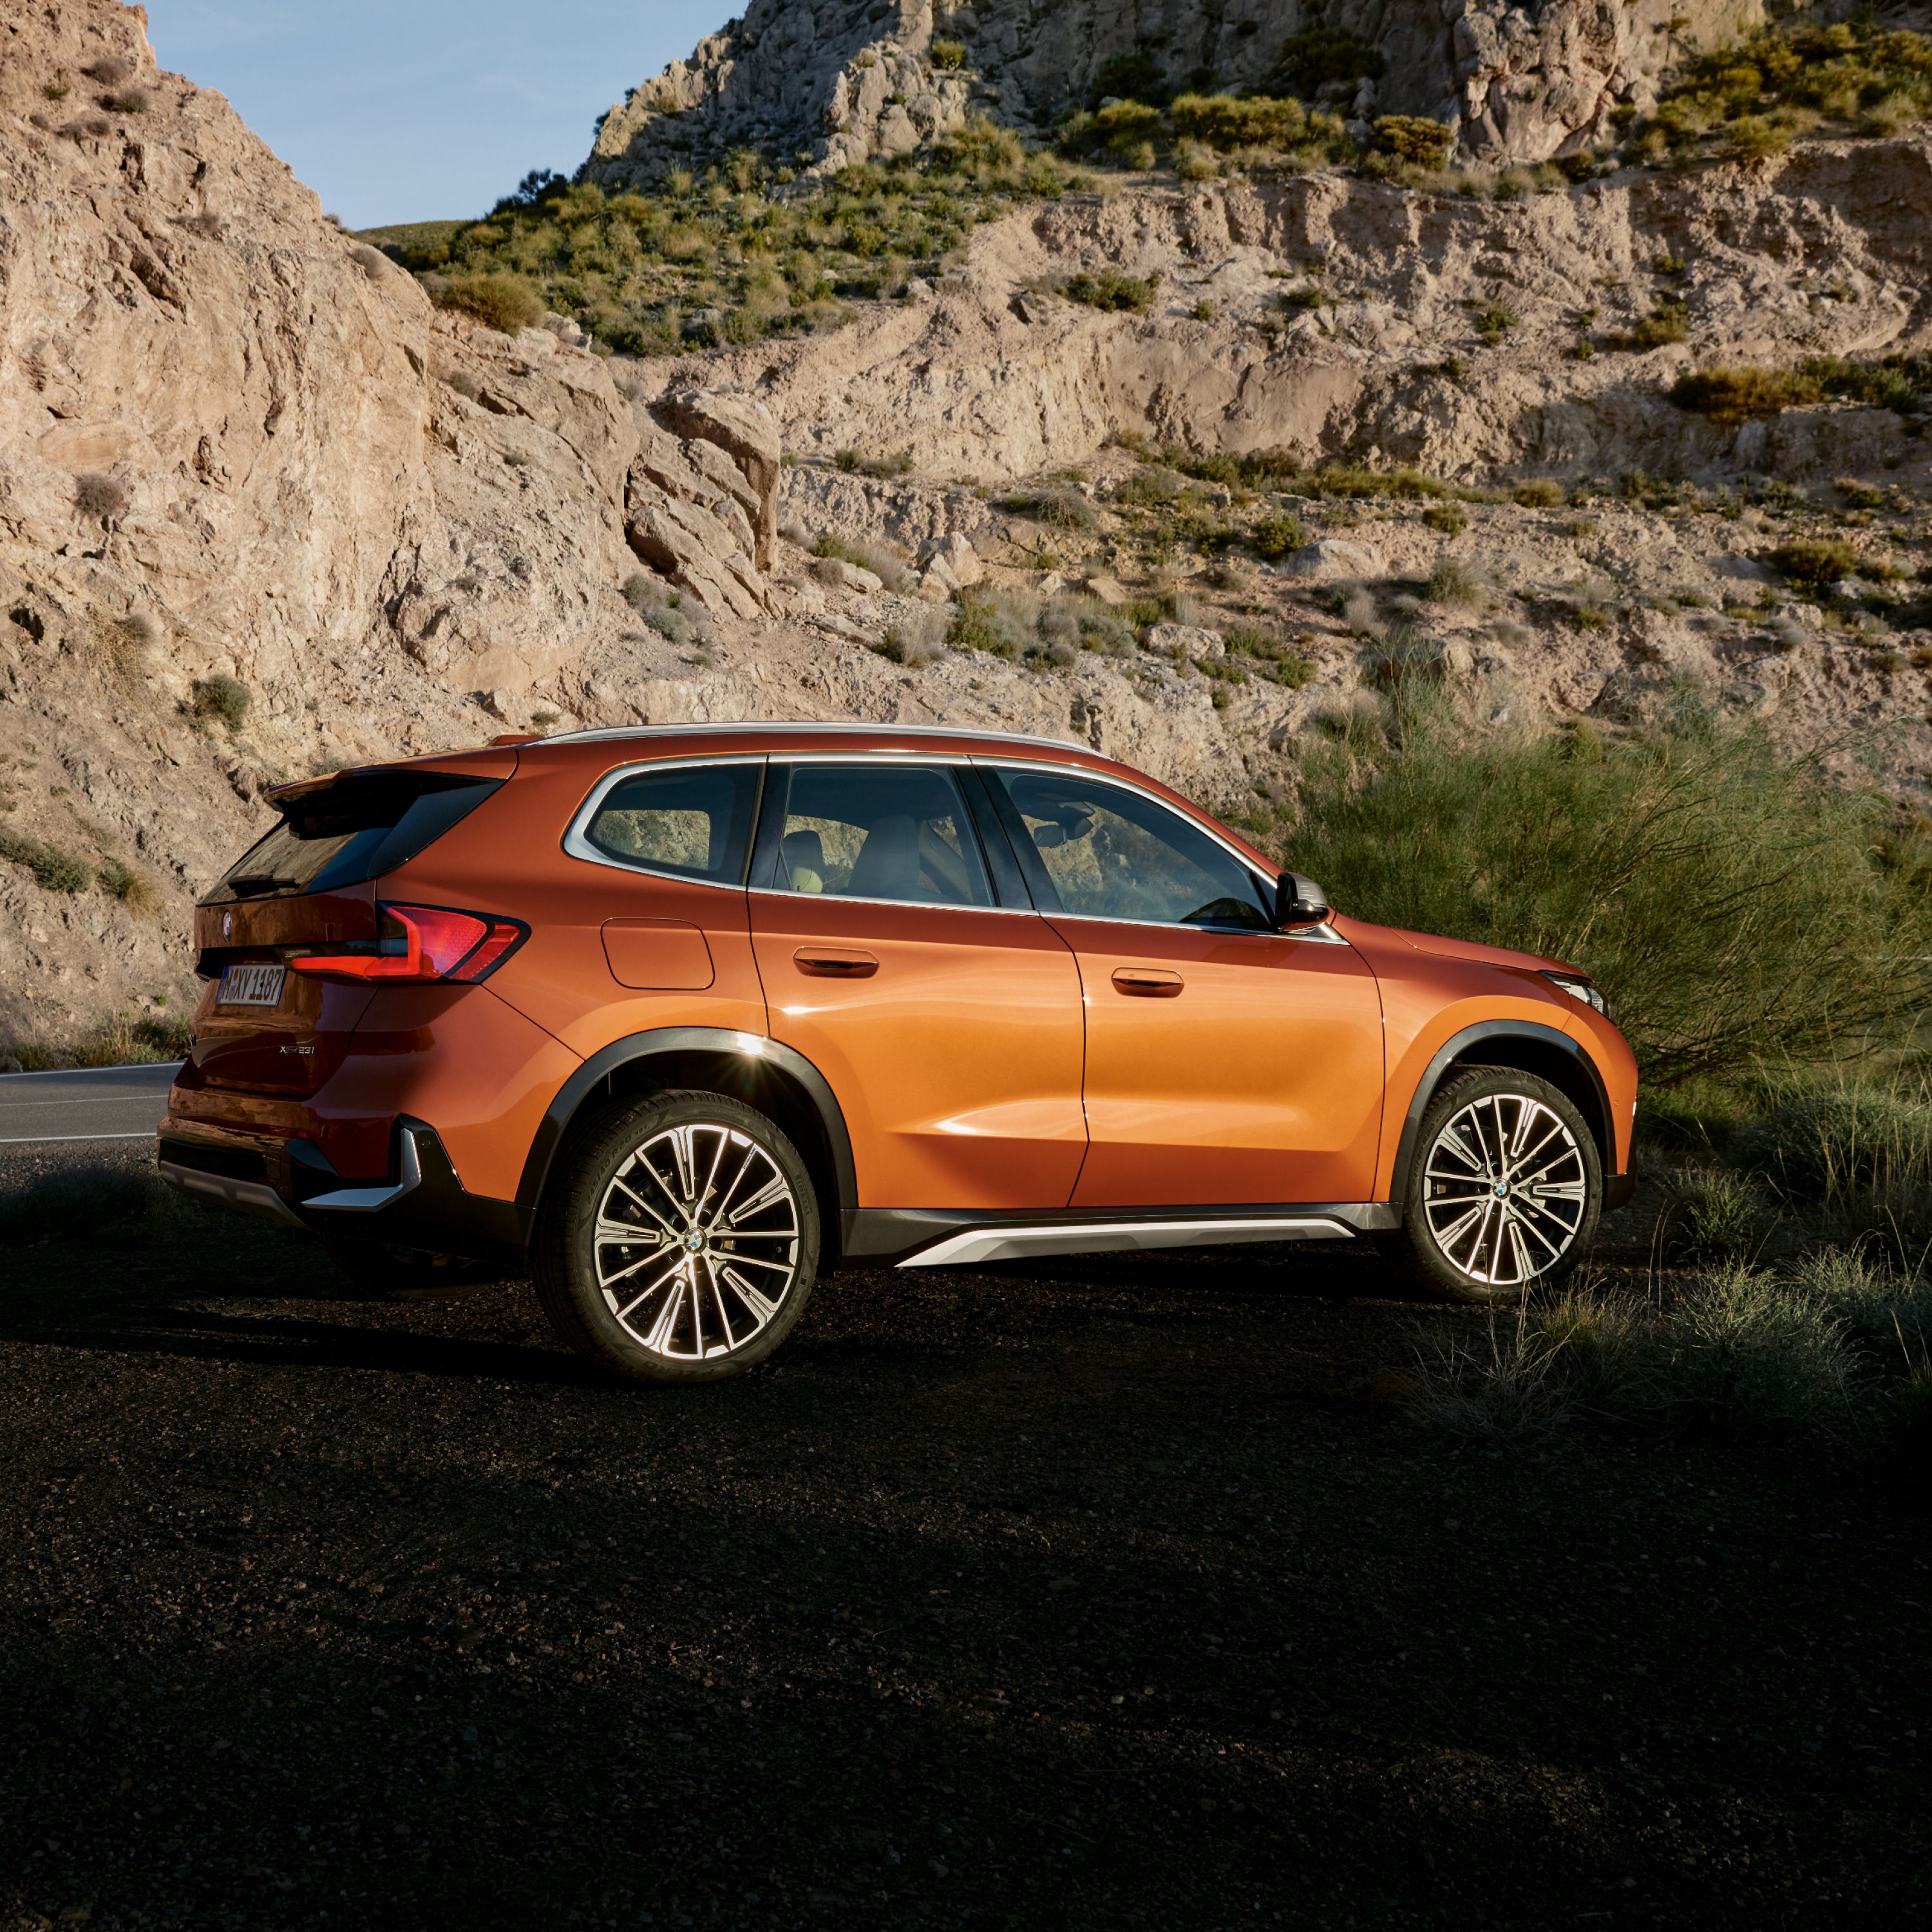 BMW X1 U11 SUV in a parking spot in front of a steep cliff side in the middle of nature